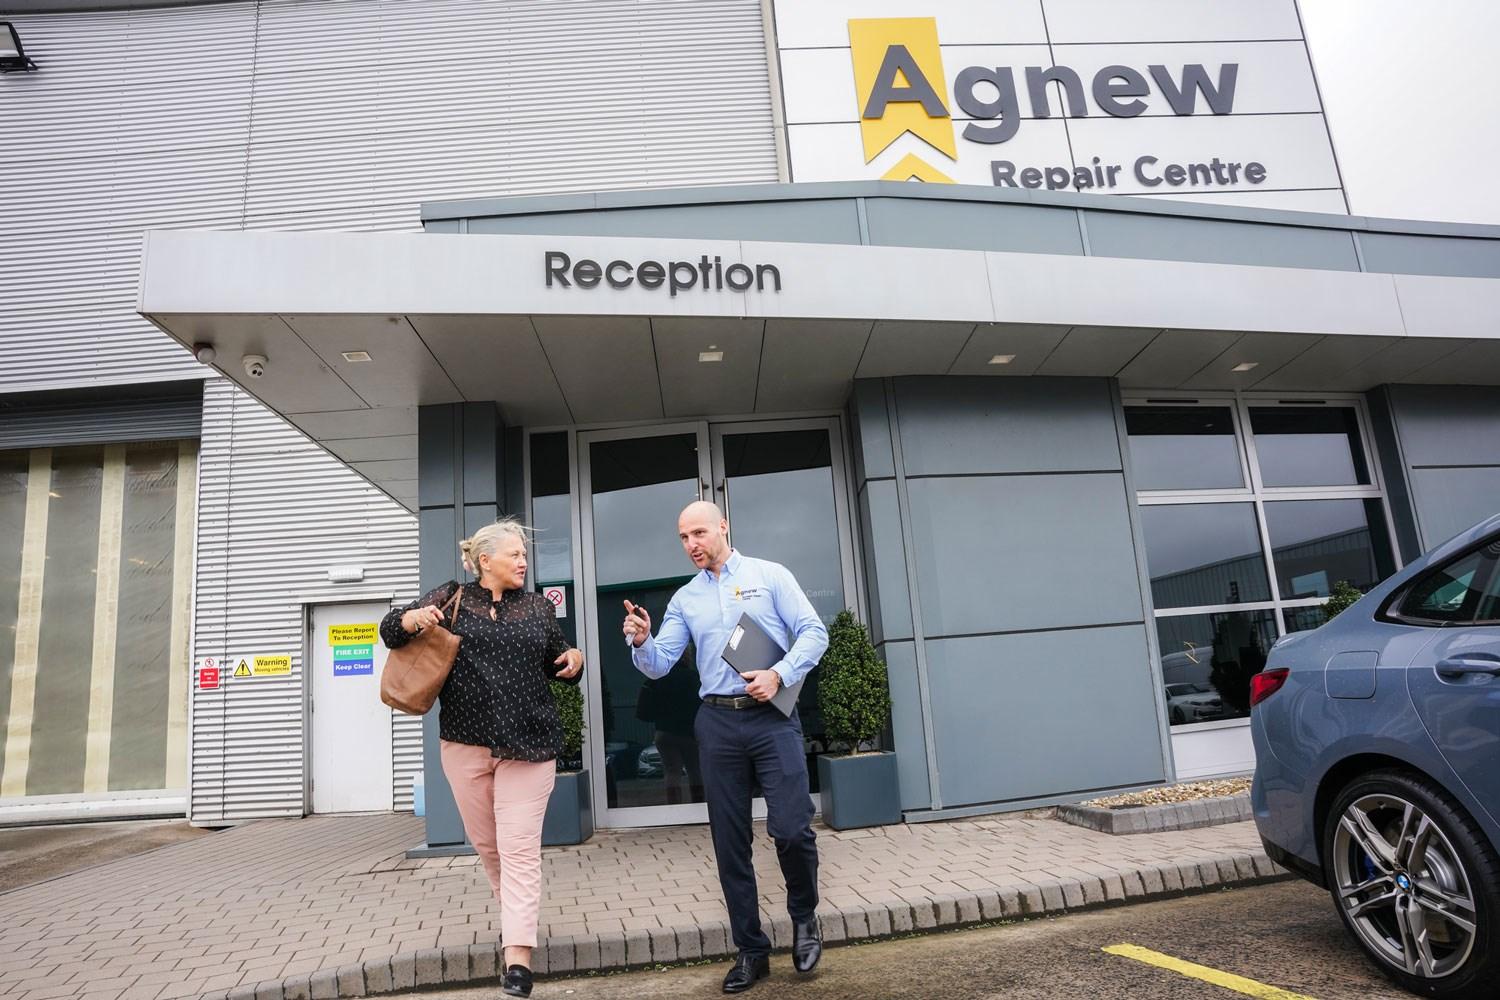 Vehicle Damage Assessor talks to customer about their vehicle as they walk towards the vehicle parked outside the reception of Agnew Repair Centre